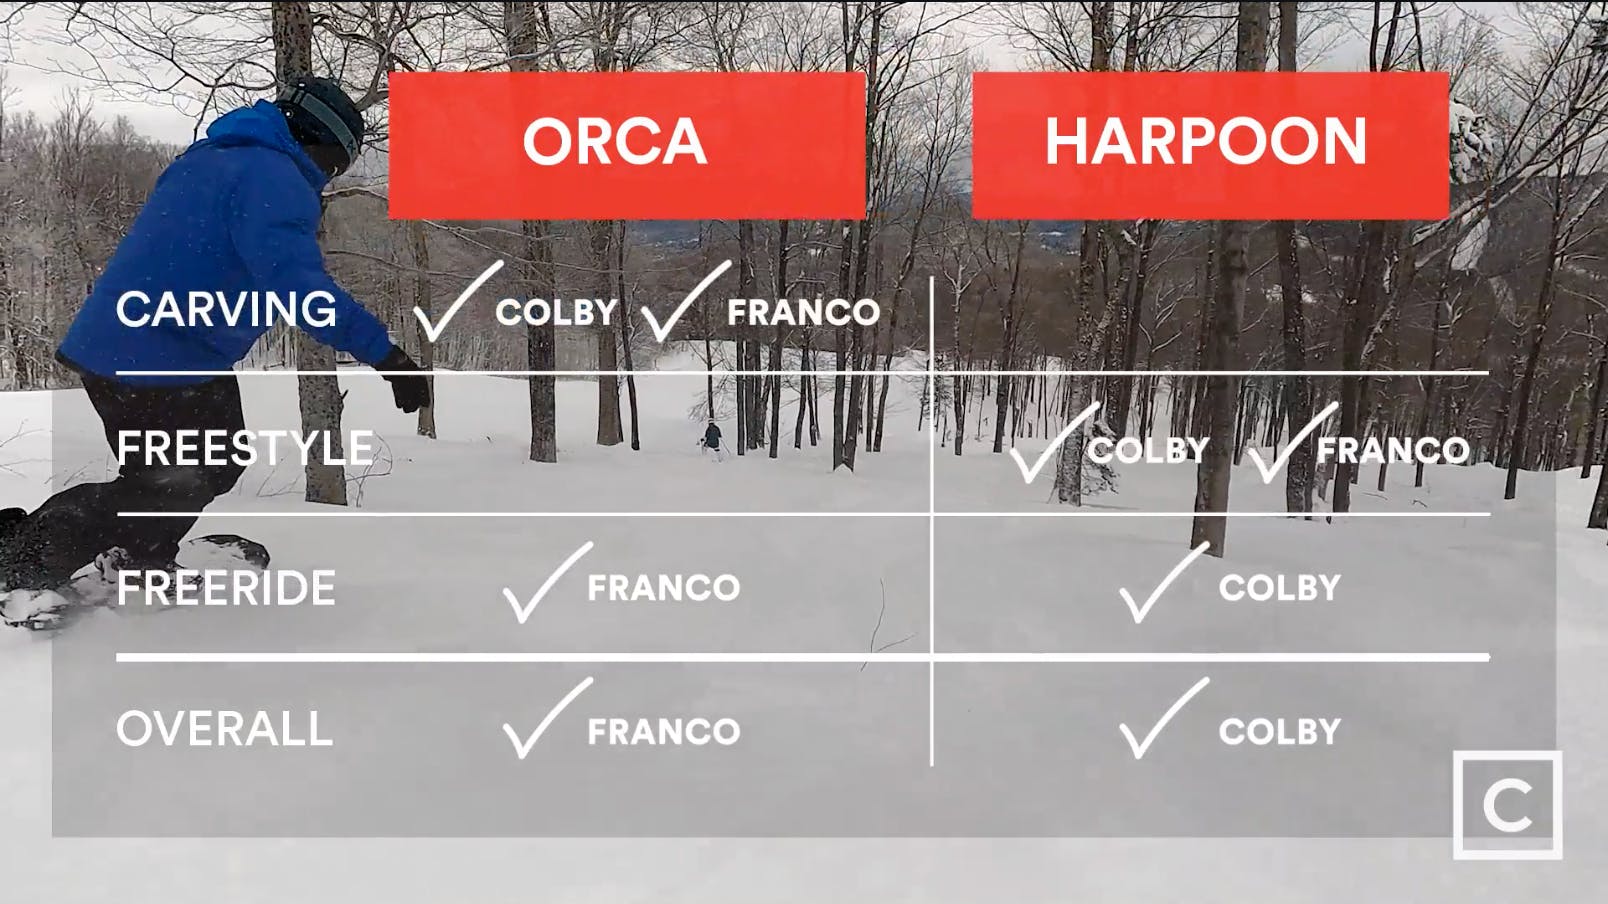 Final leaderboard - Franco prefers the Lib Tech Orca and Colby prefers the Never Summer Harpoon overall